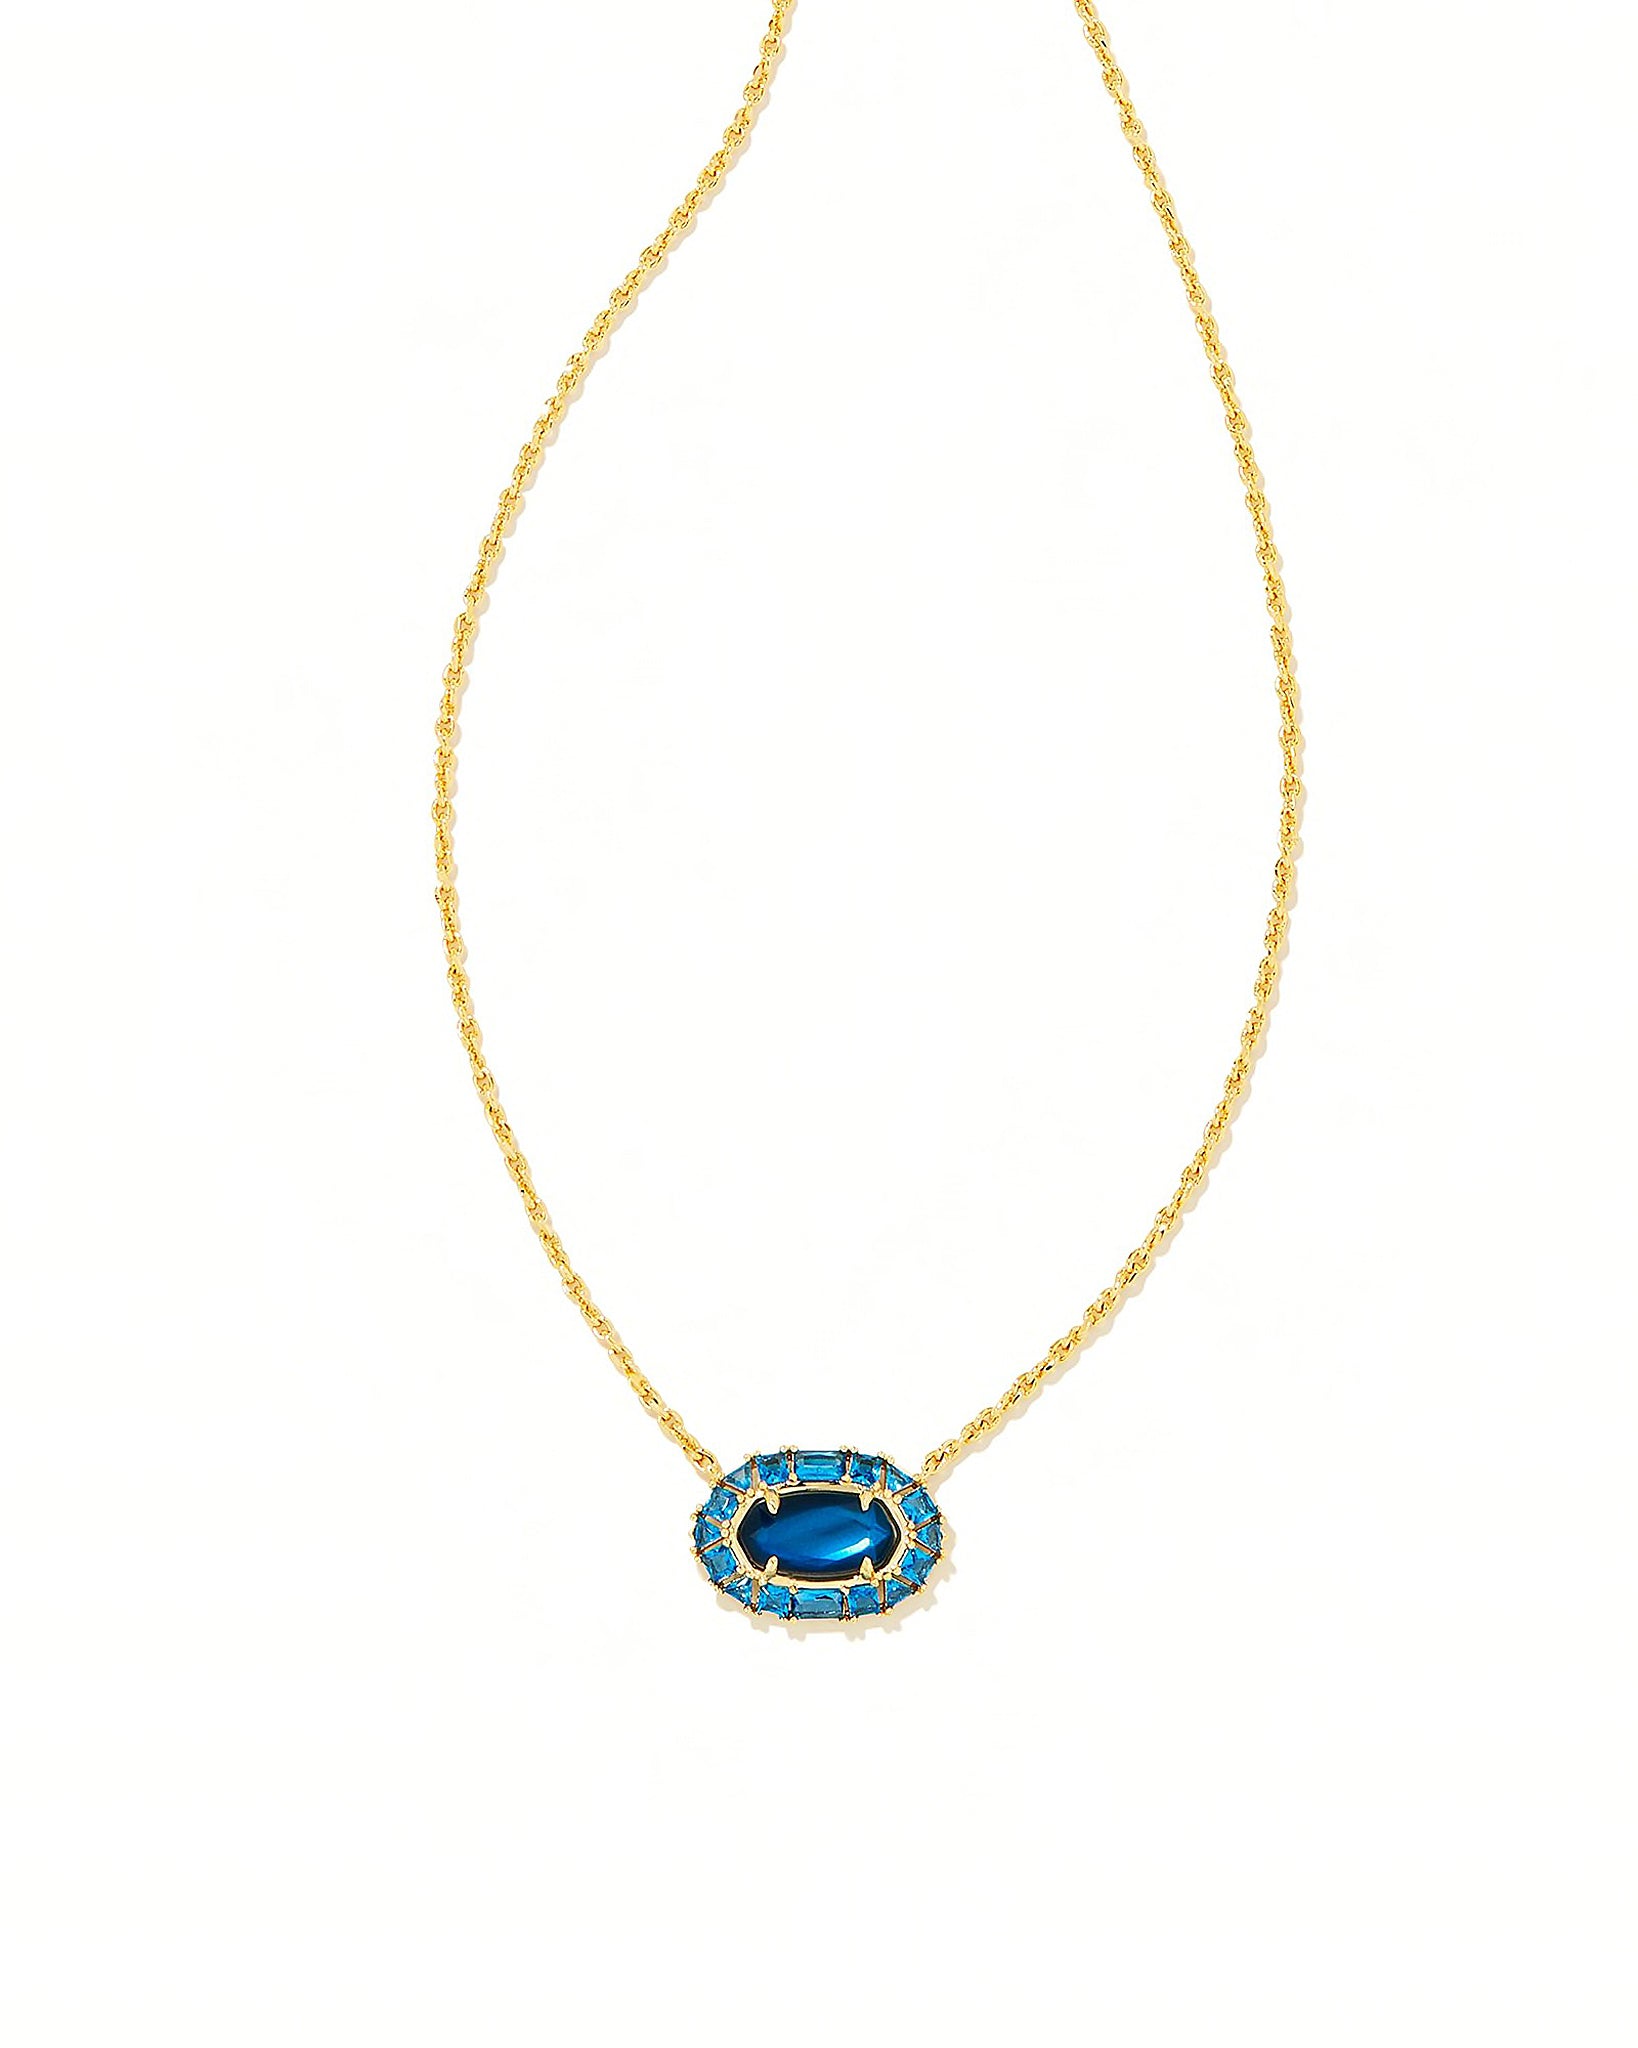 Kendra Scott Elisa Crystal Frame Pendant Necklace in Sea Blue Illusion and Gold